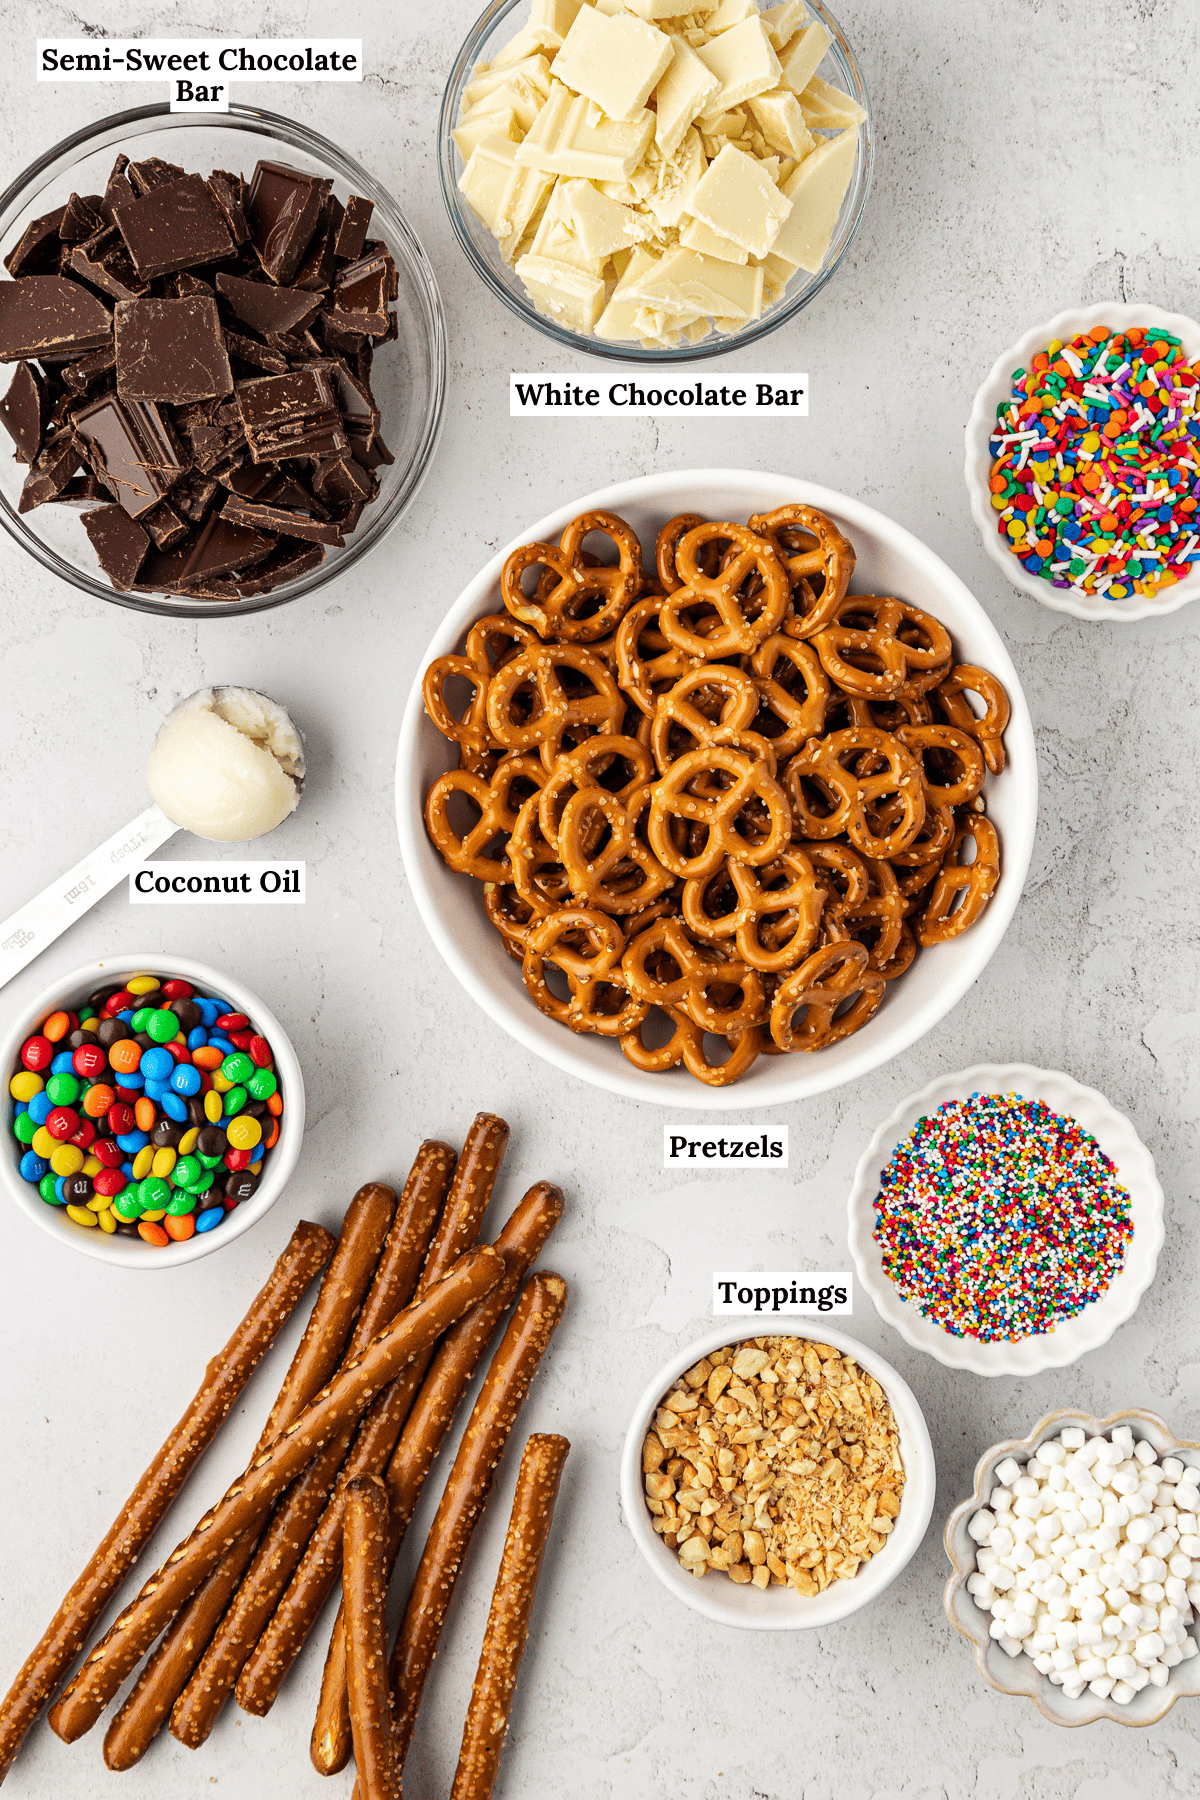 over head view of chocolate covered pretzels including semi-sweet chocolate bars, white chocolate bars, coconut oil, rainbow sprinkles, m&ms, crushed nuts and mini marshmallows, twist pretzels and pretzel rods